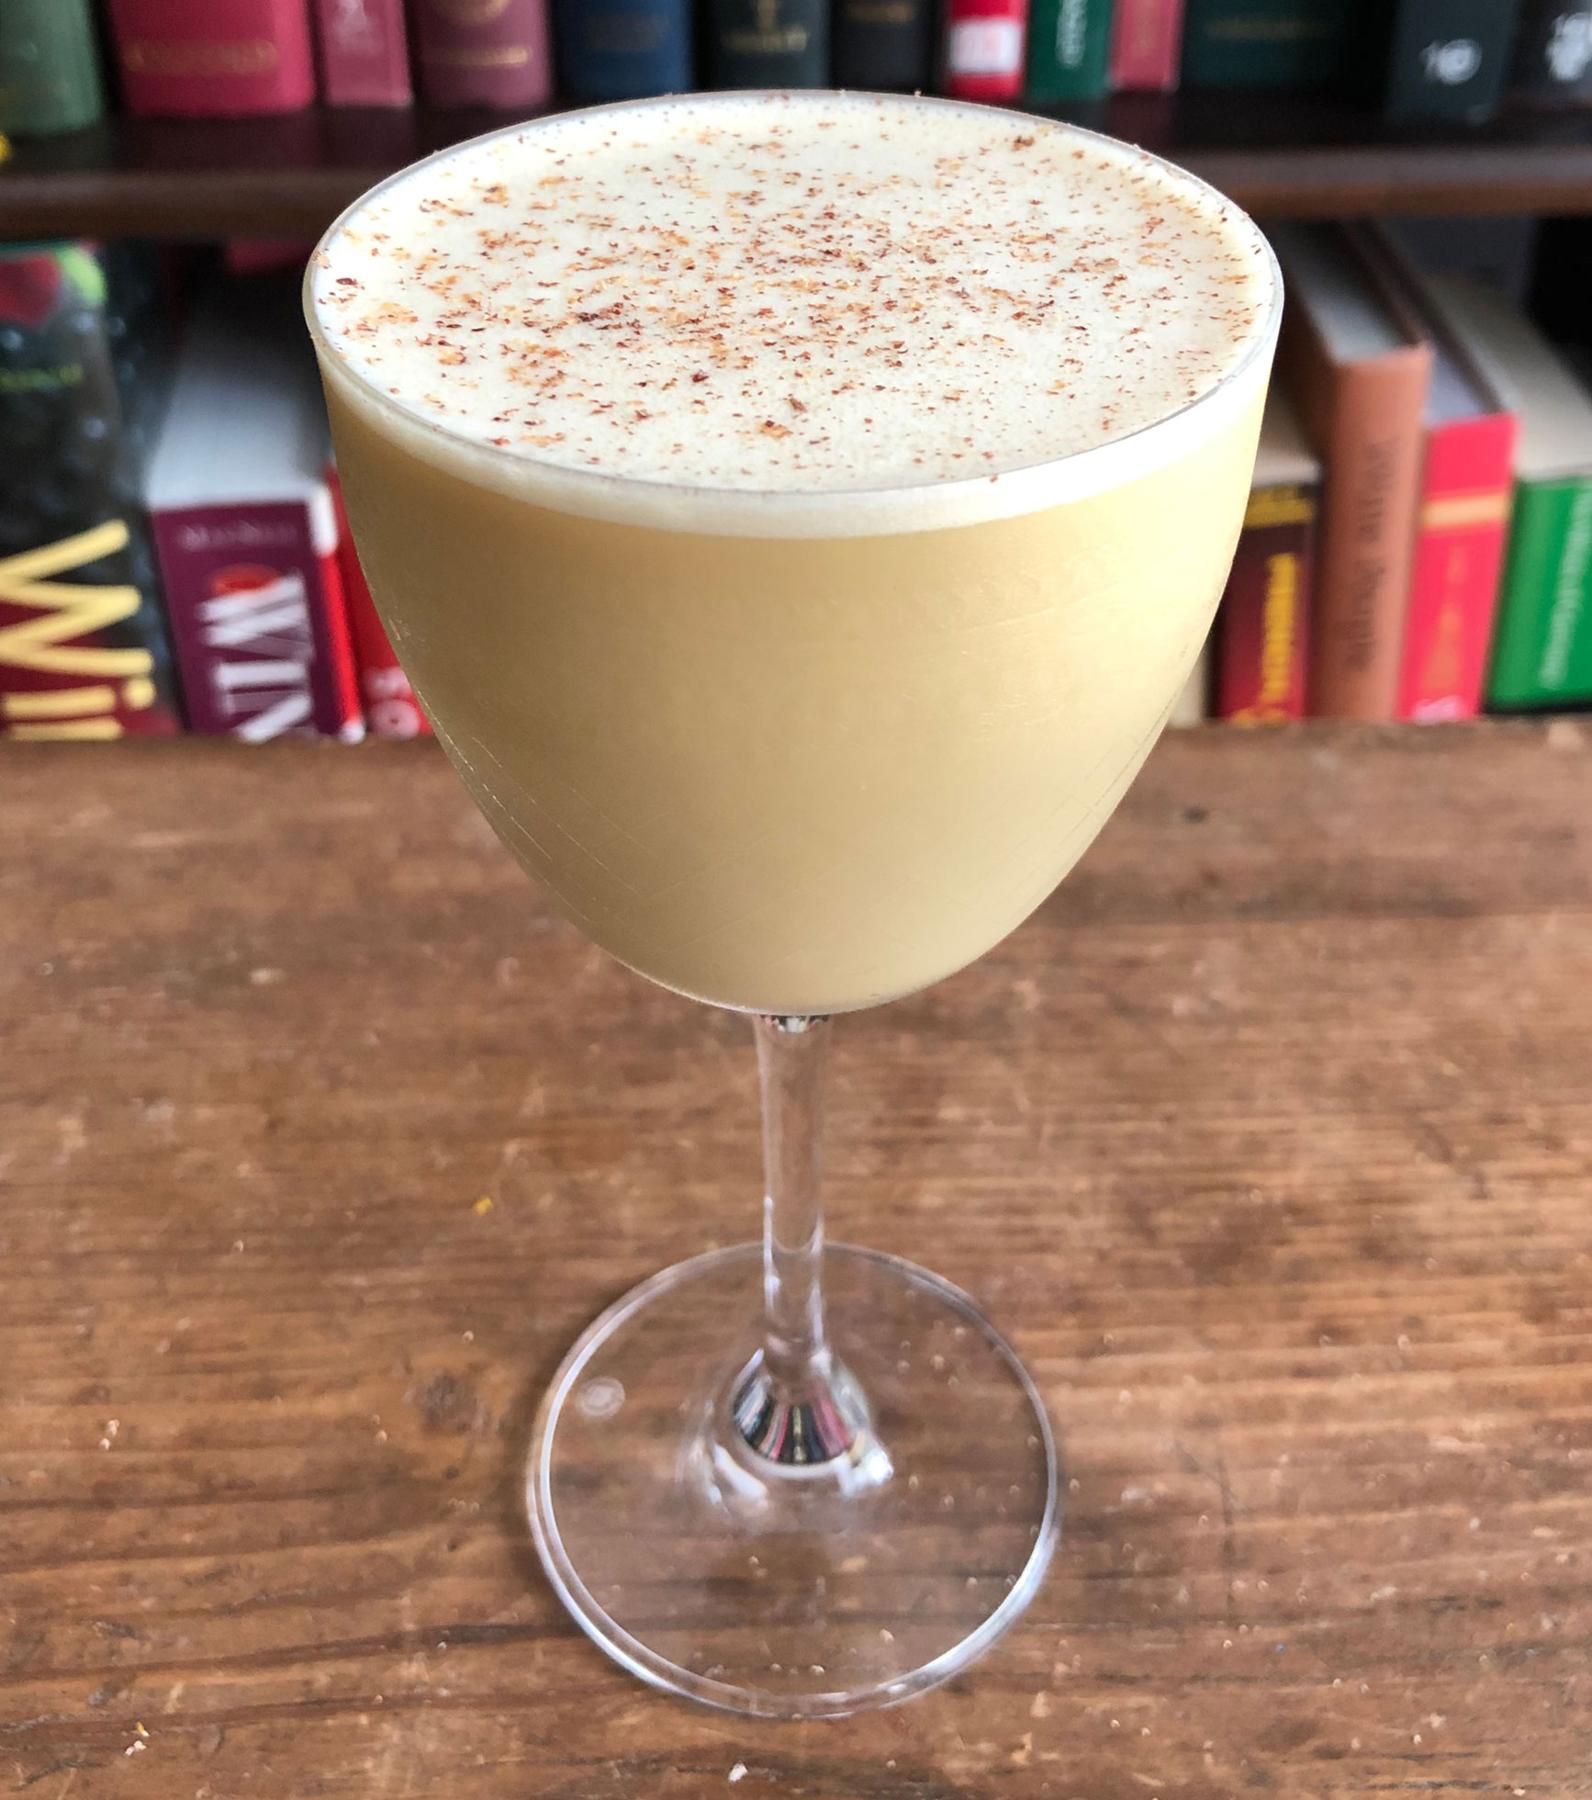 An example of the Flip It and Reverse It, the mixed drink (drink) featuring Saveiro ‘Vento do Oeste’ Madeira, raw egg, half & half, maple syrup, and grated nutmeg; photo by Lee Edwards